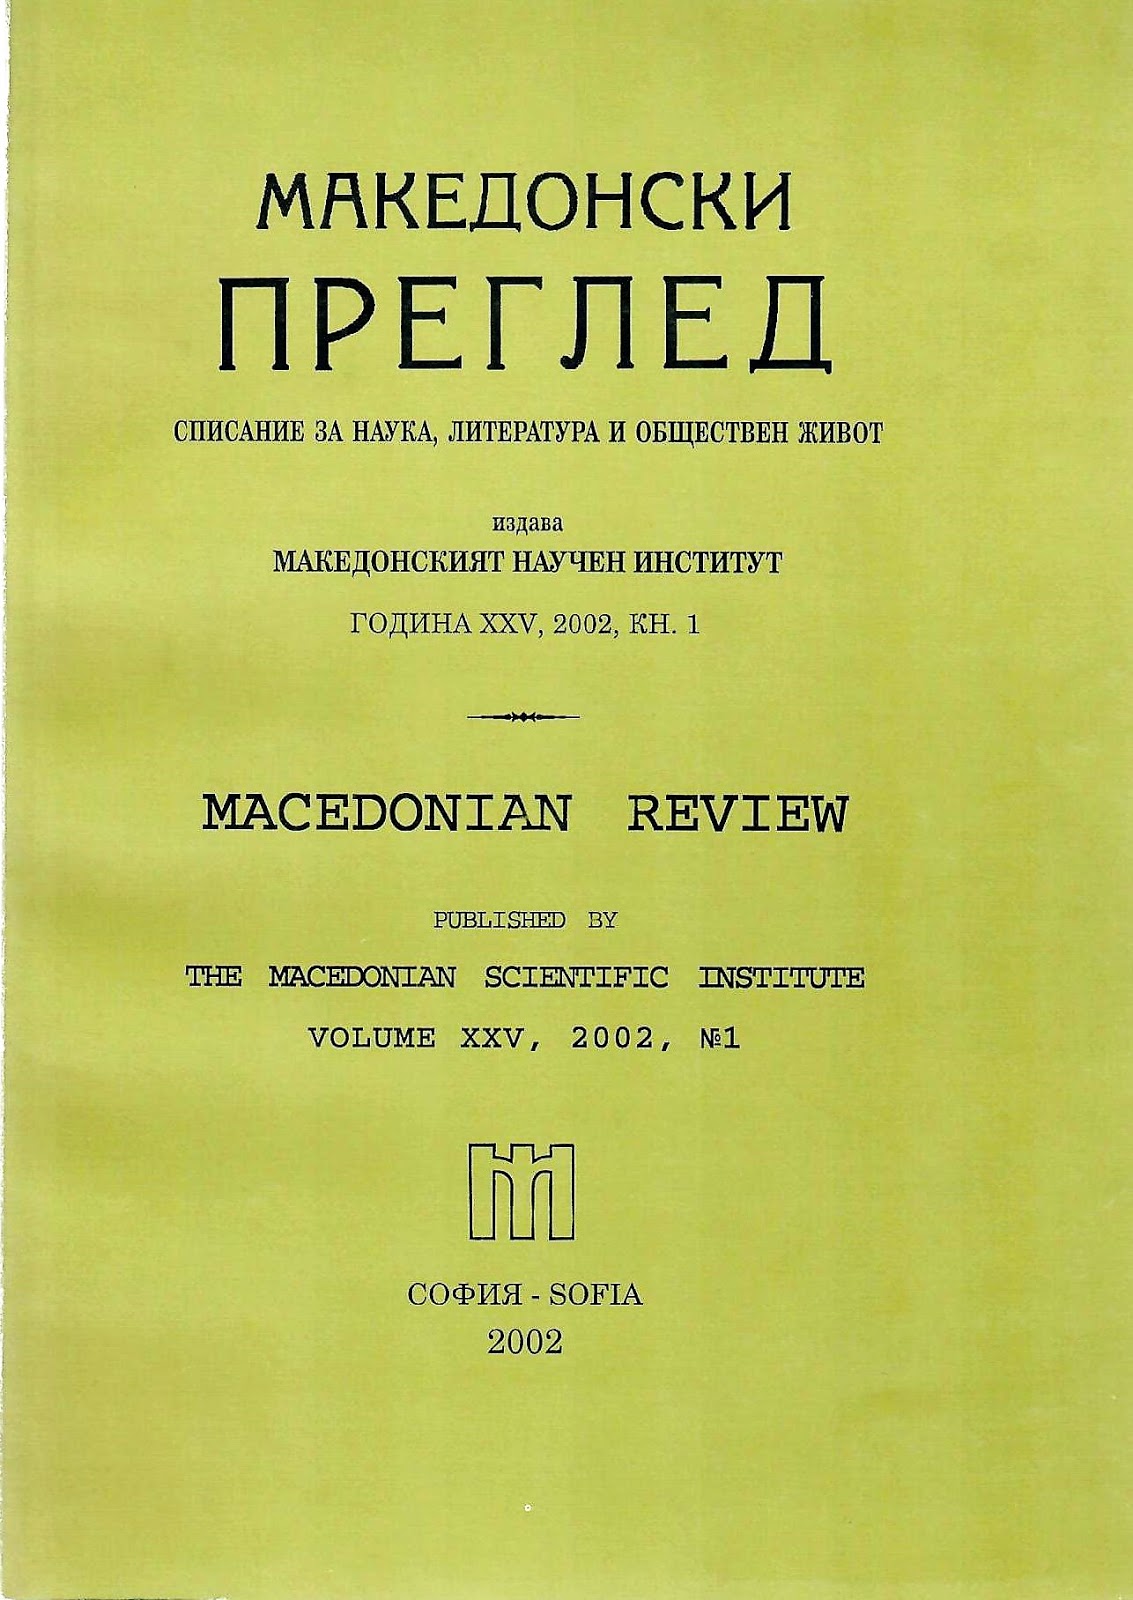 Position of the Macedonian Scientific Institute — Sofia 
on Report No. 122 of the International Crisis Group 
of December 10, 2001 in Relation to the Crisis of Macedonia Cover Image